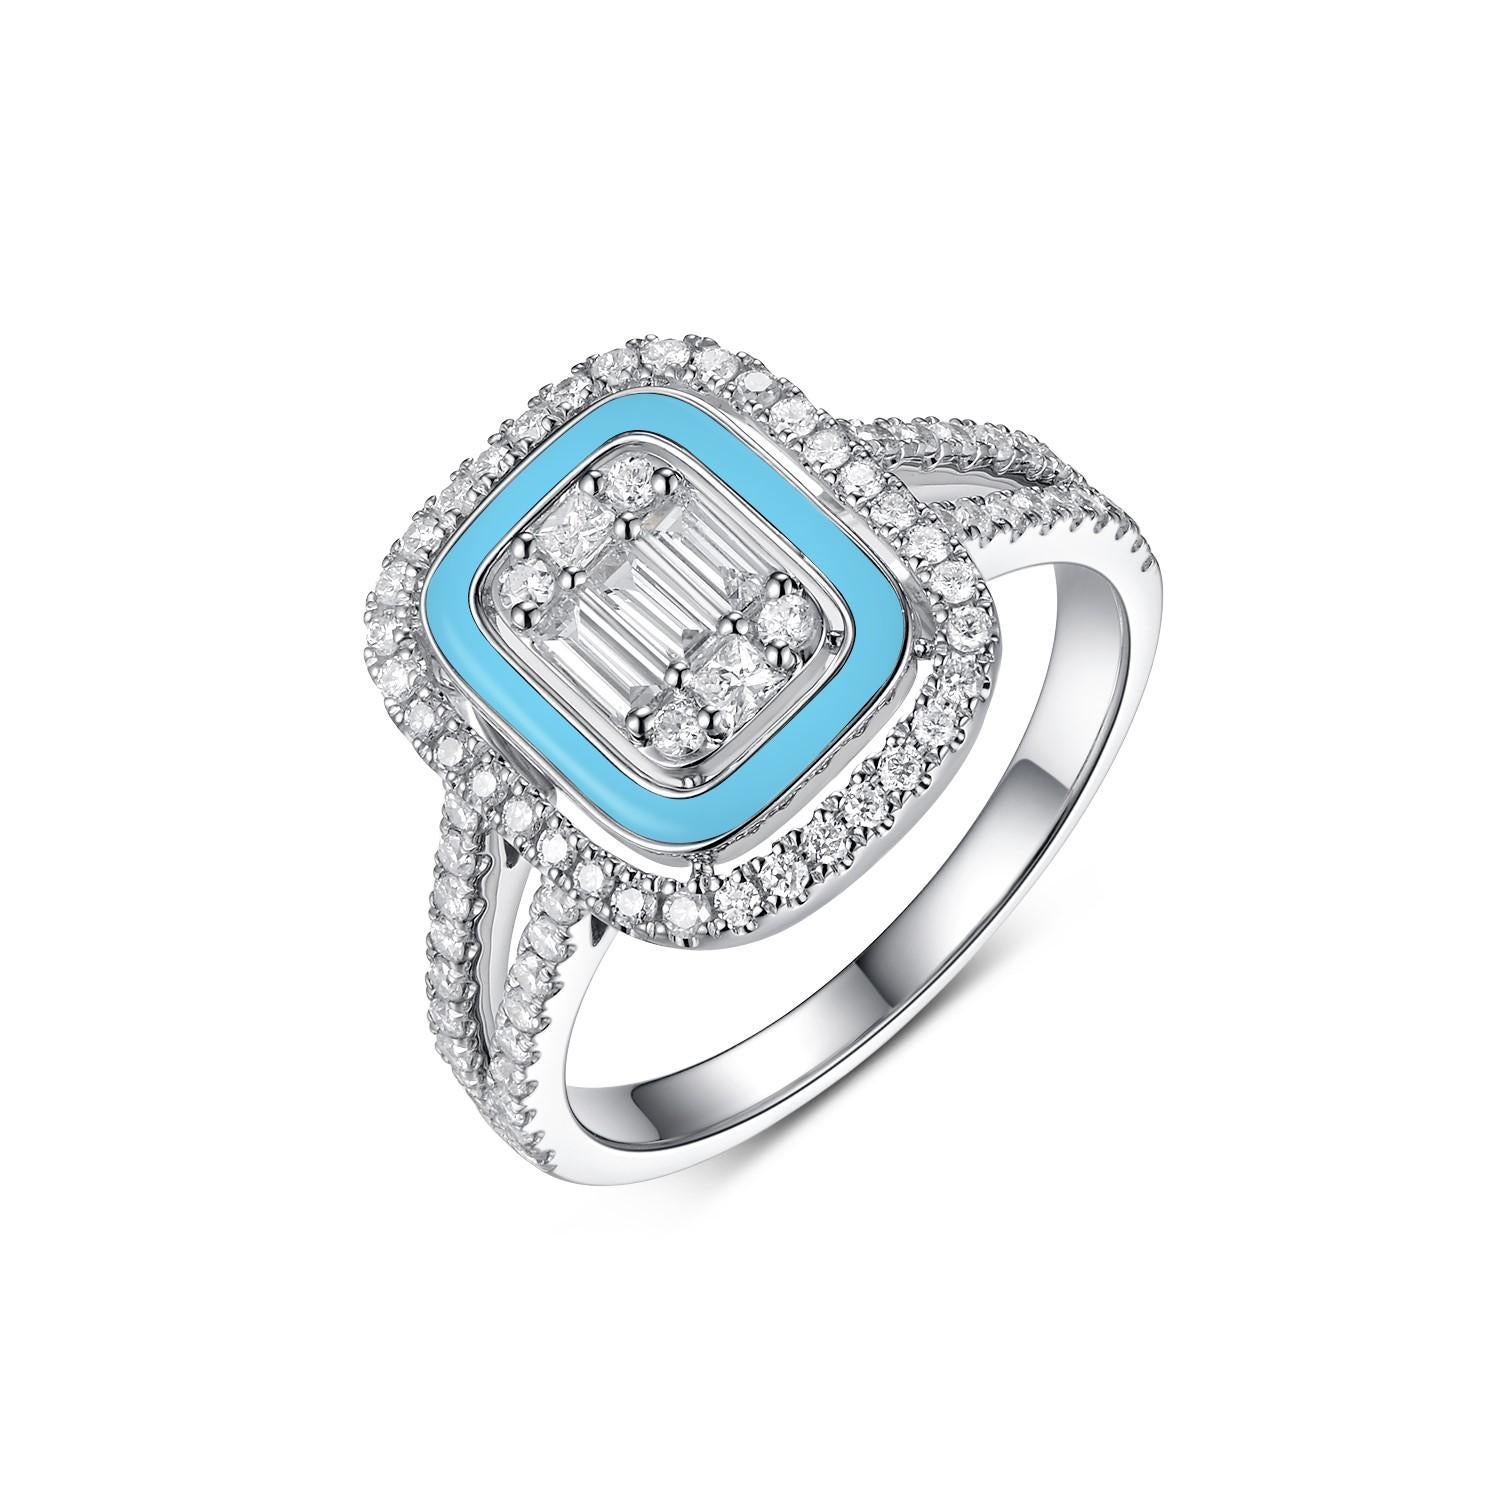 This piece is handcrafted in 14 karat white gold. This diamond pendant with chain features 5 baguette diamonds weight 0.19 carat and 0.43 carats of round diamonds. The inner halo is finish in turquoise color enamel. This ring also have a matching